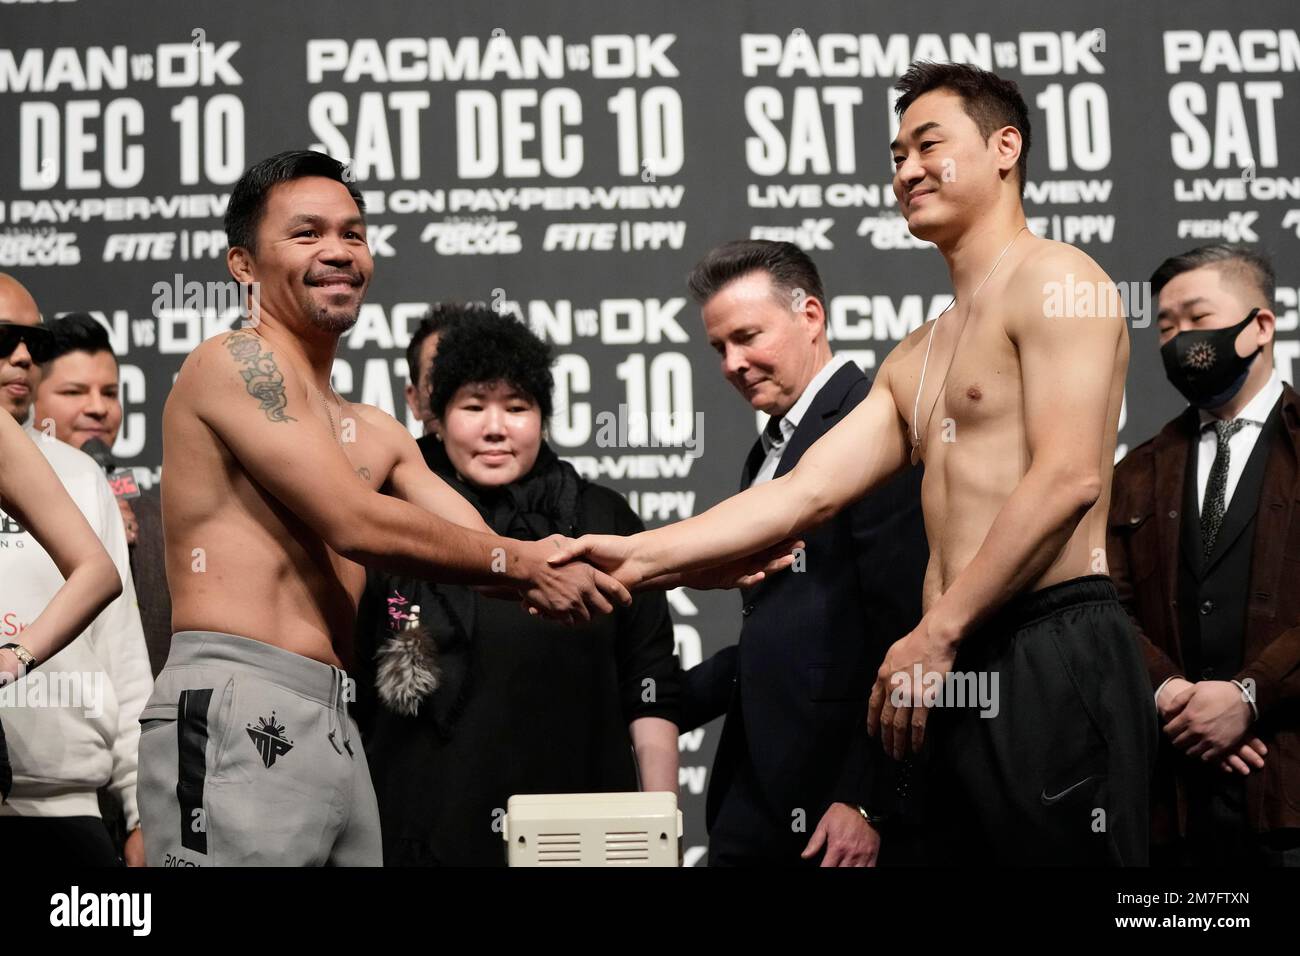 Former Filipino boxer Manny Pacquiao, left, shakes hands with South Korean martial artist D.K. Yoo during a weigh-in at the KINTEX in Goyang, South Korea, Saturday, Dec